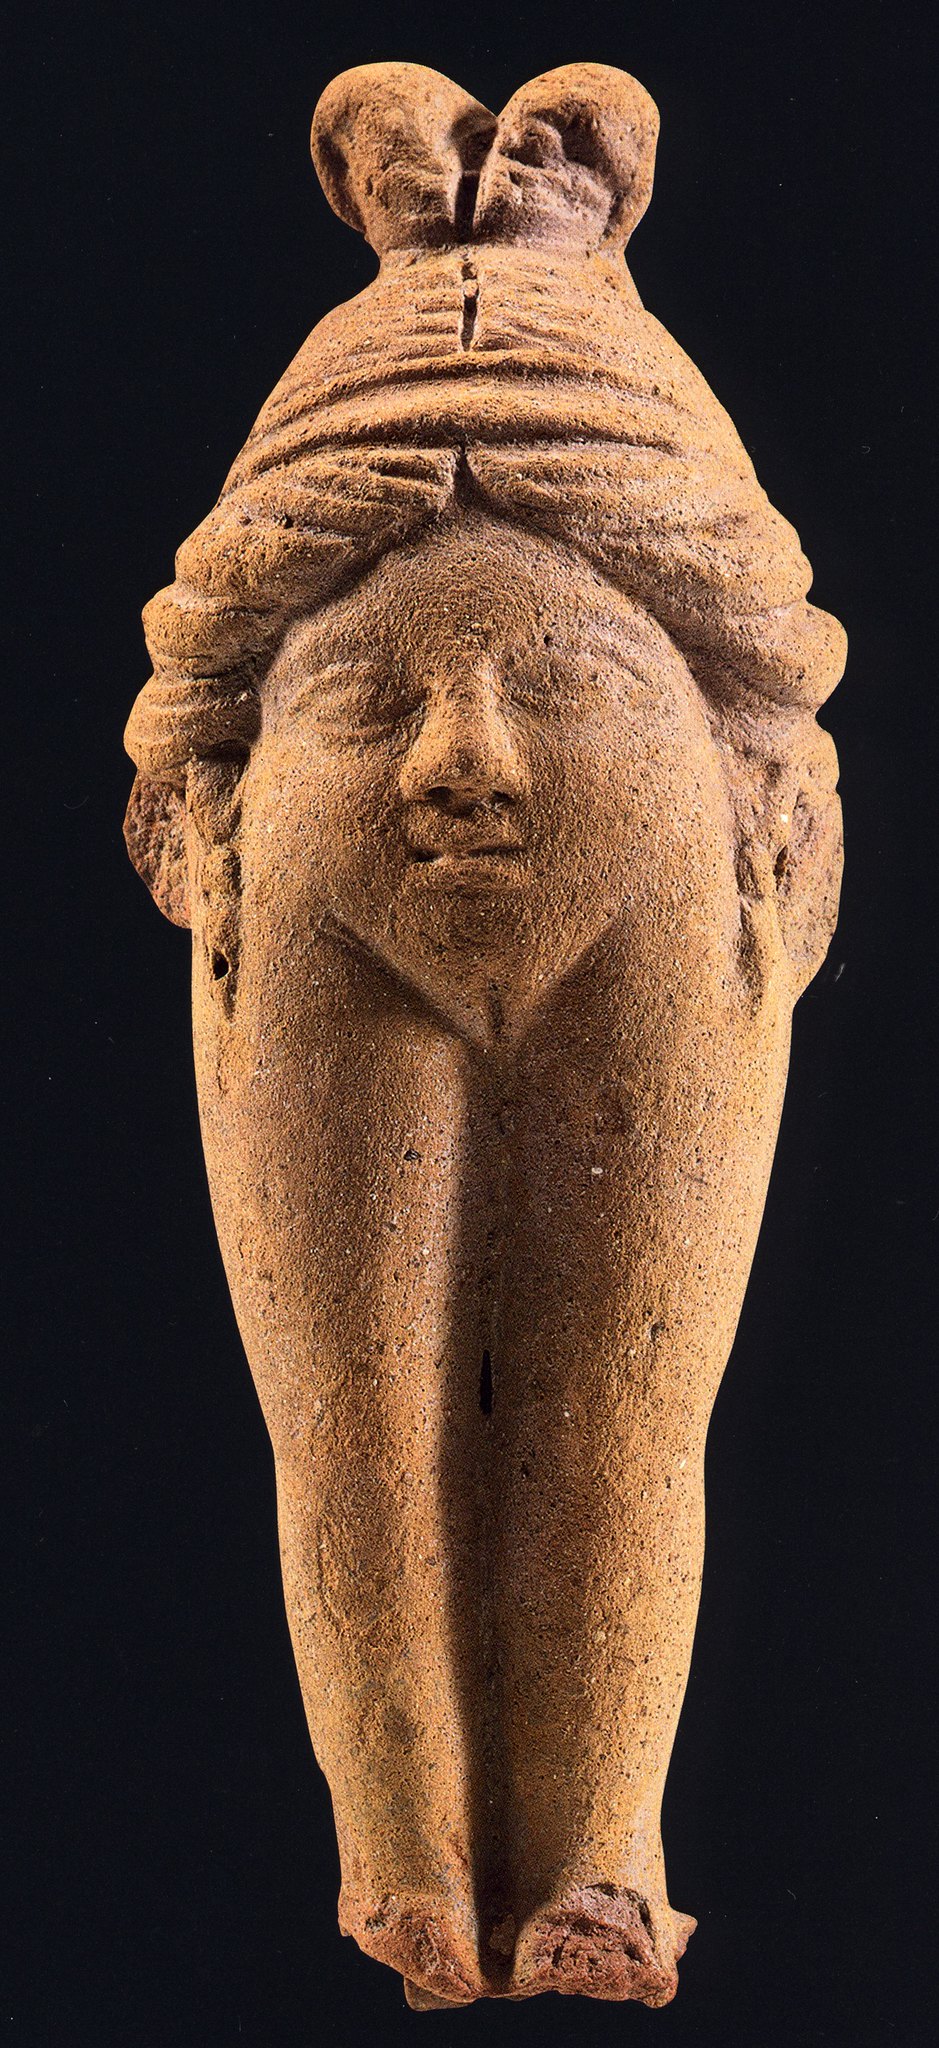 An ancient Iambe statuette. Source